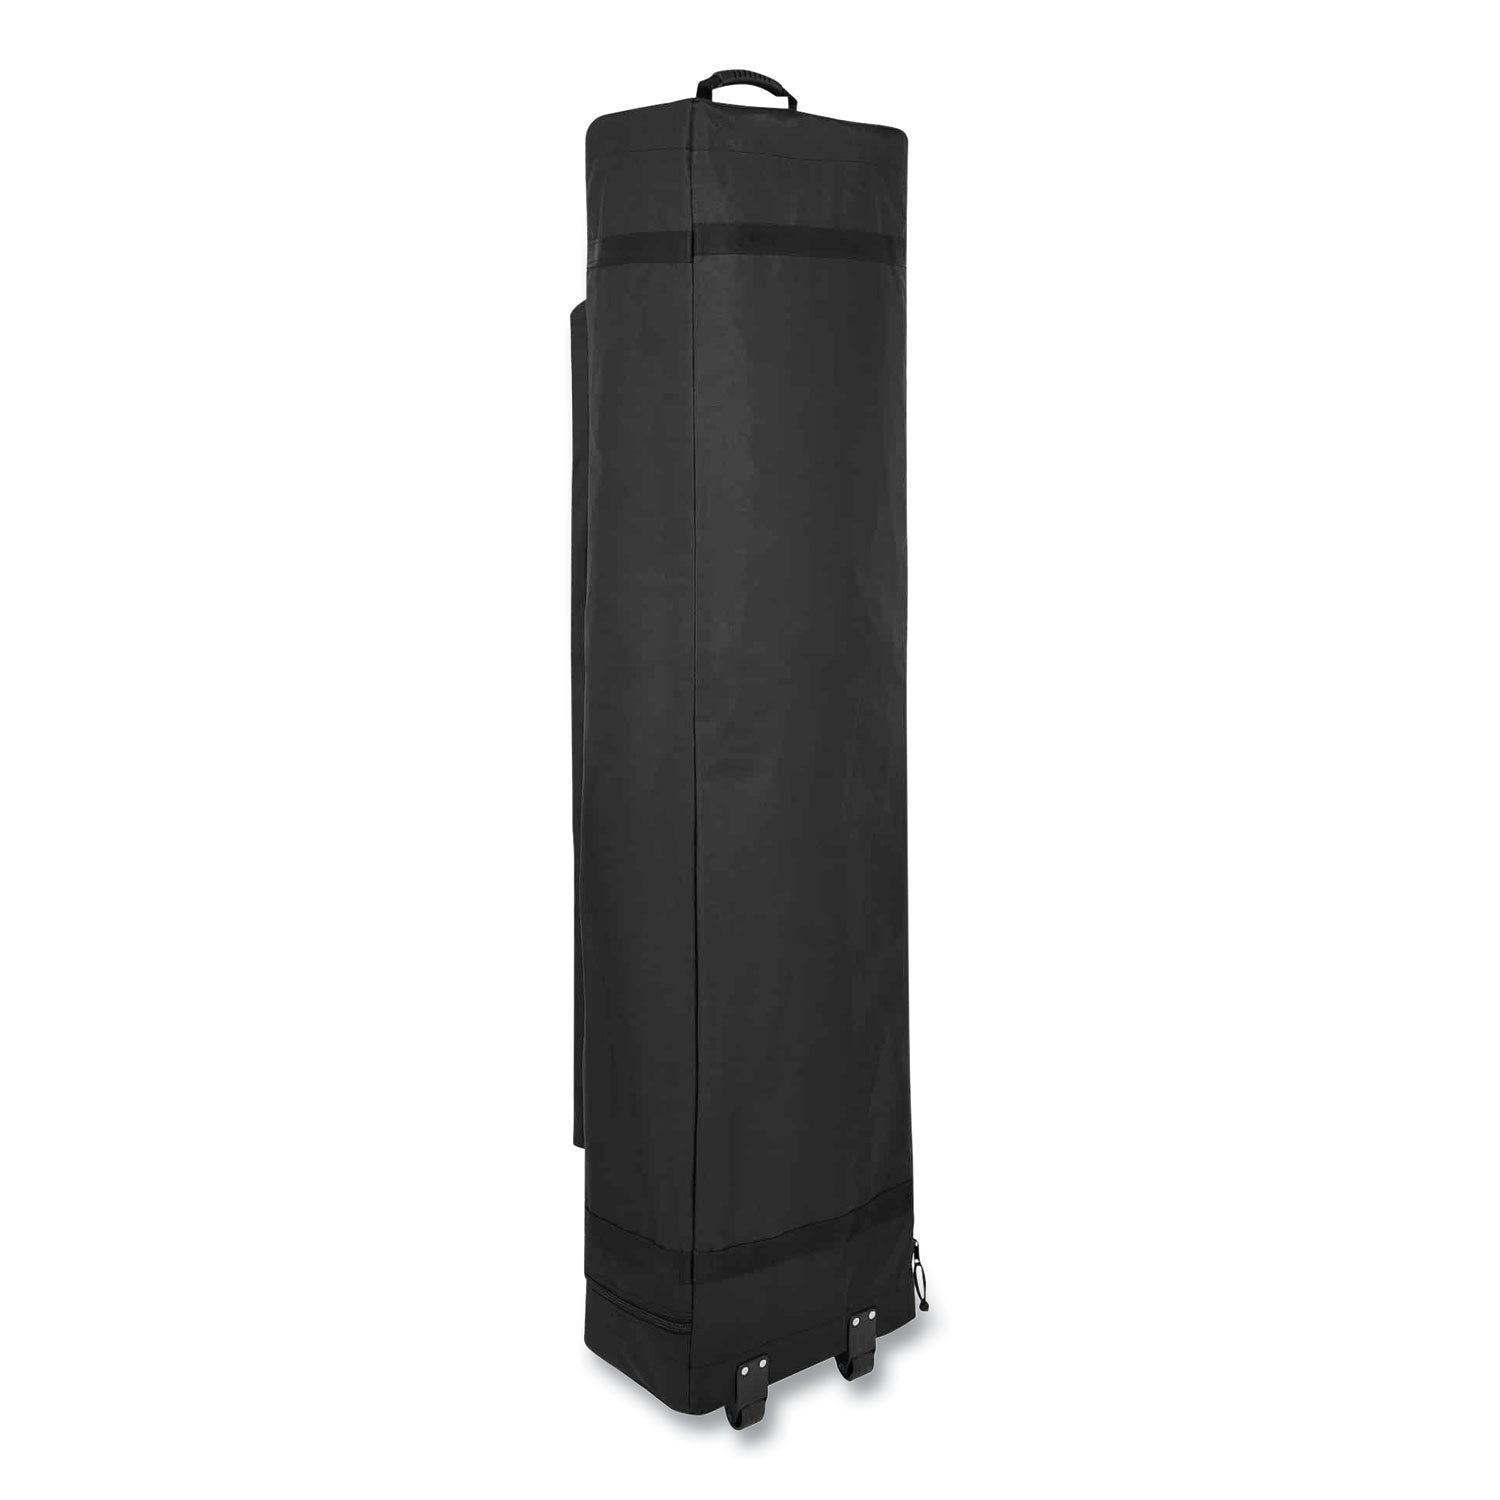 shax-6015b-replacement-tent-storage-bag-for-6015-polyester-black-ships-in-1-3-business-days_ego12917 - 1